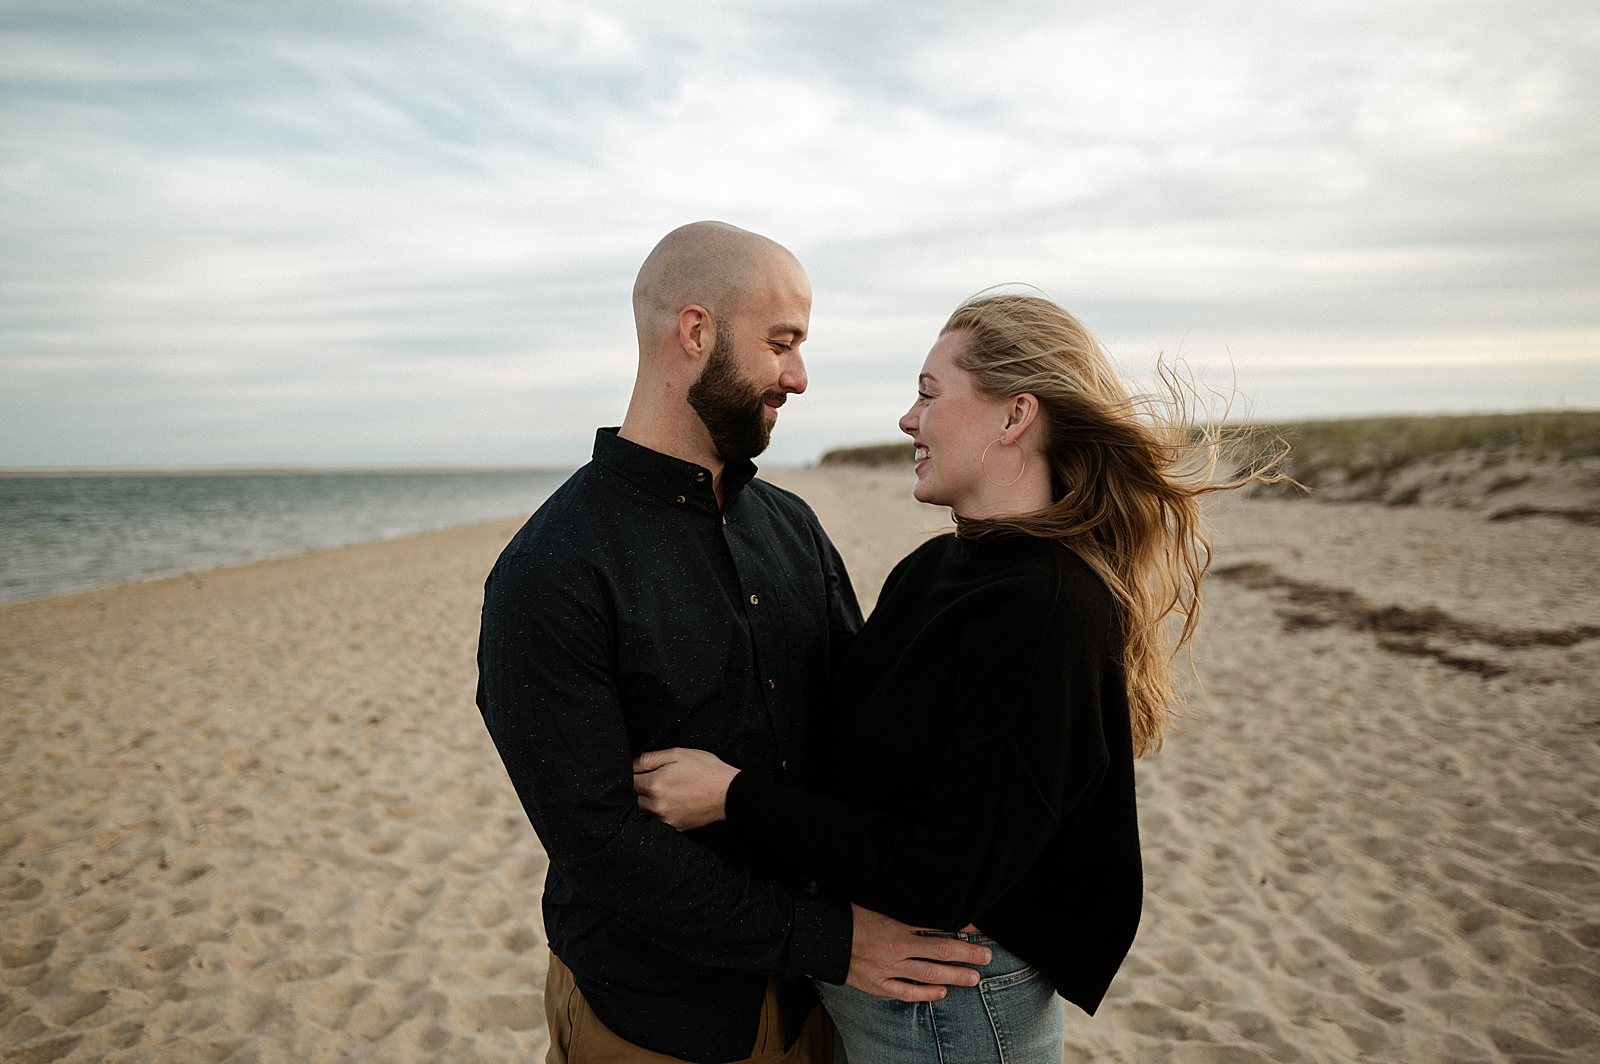 Couple hugging and looking at each other on the beach by the ocean